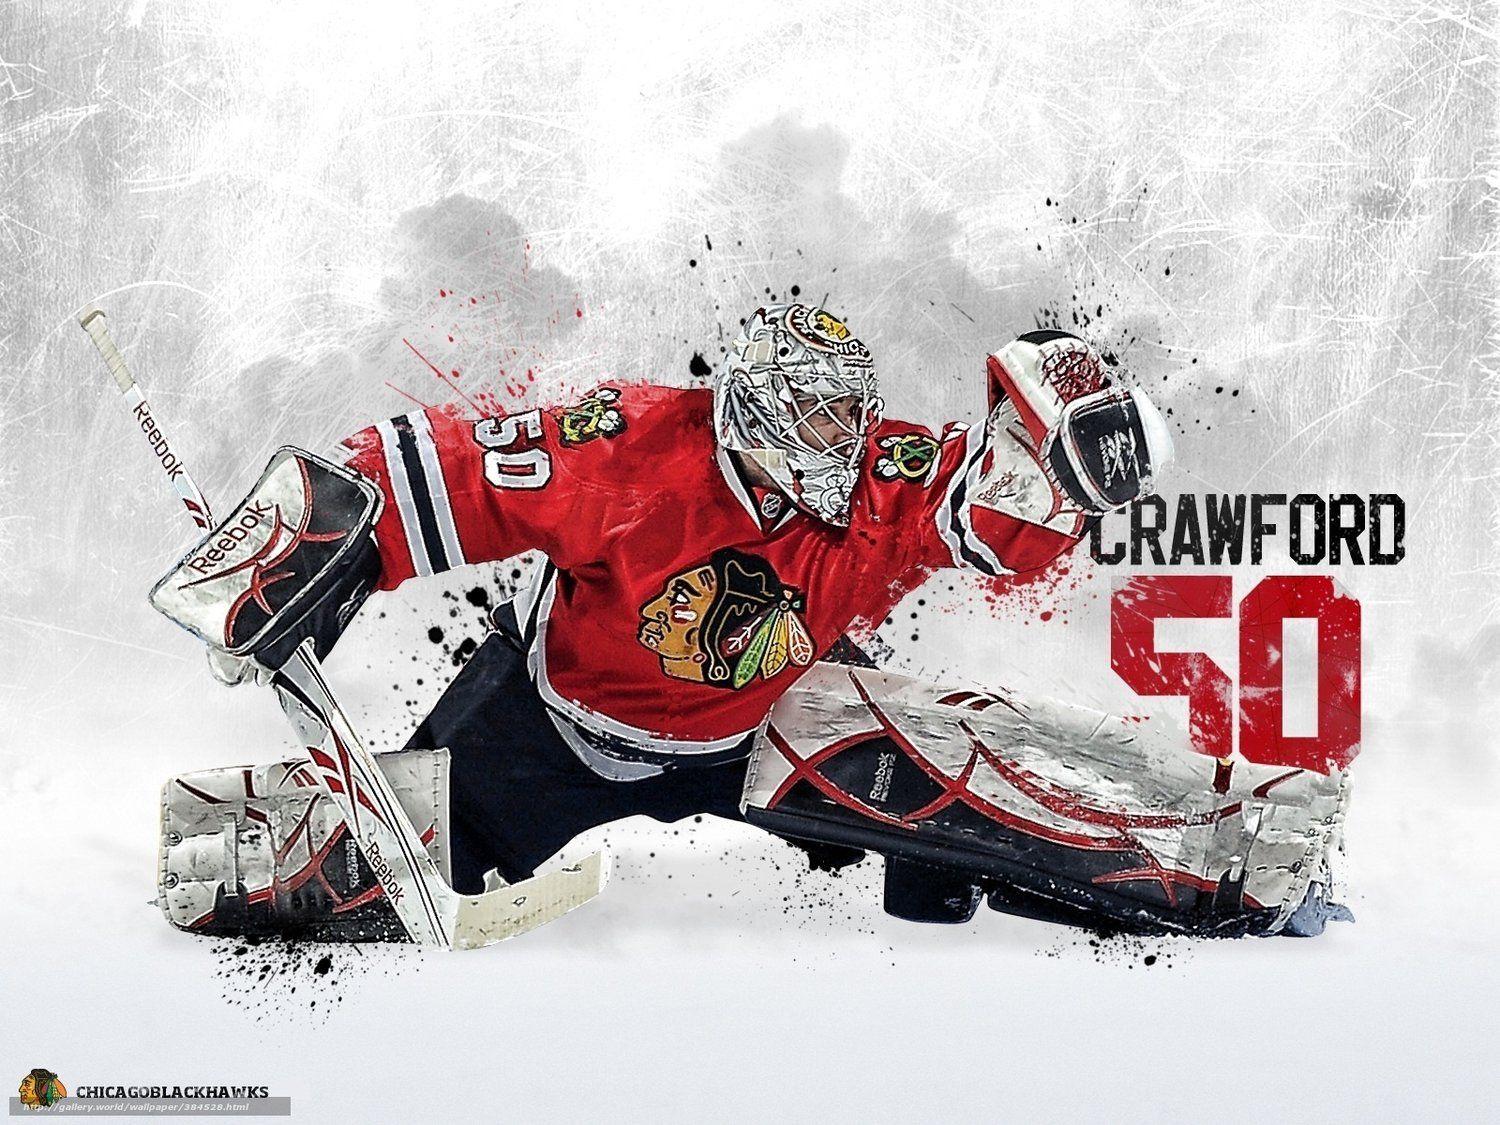 The Chicago Blackhawks: Do they need Crawford? Yes, No, Maybe So